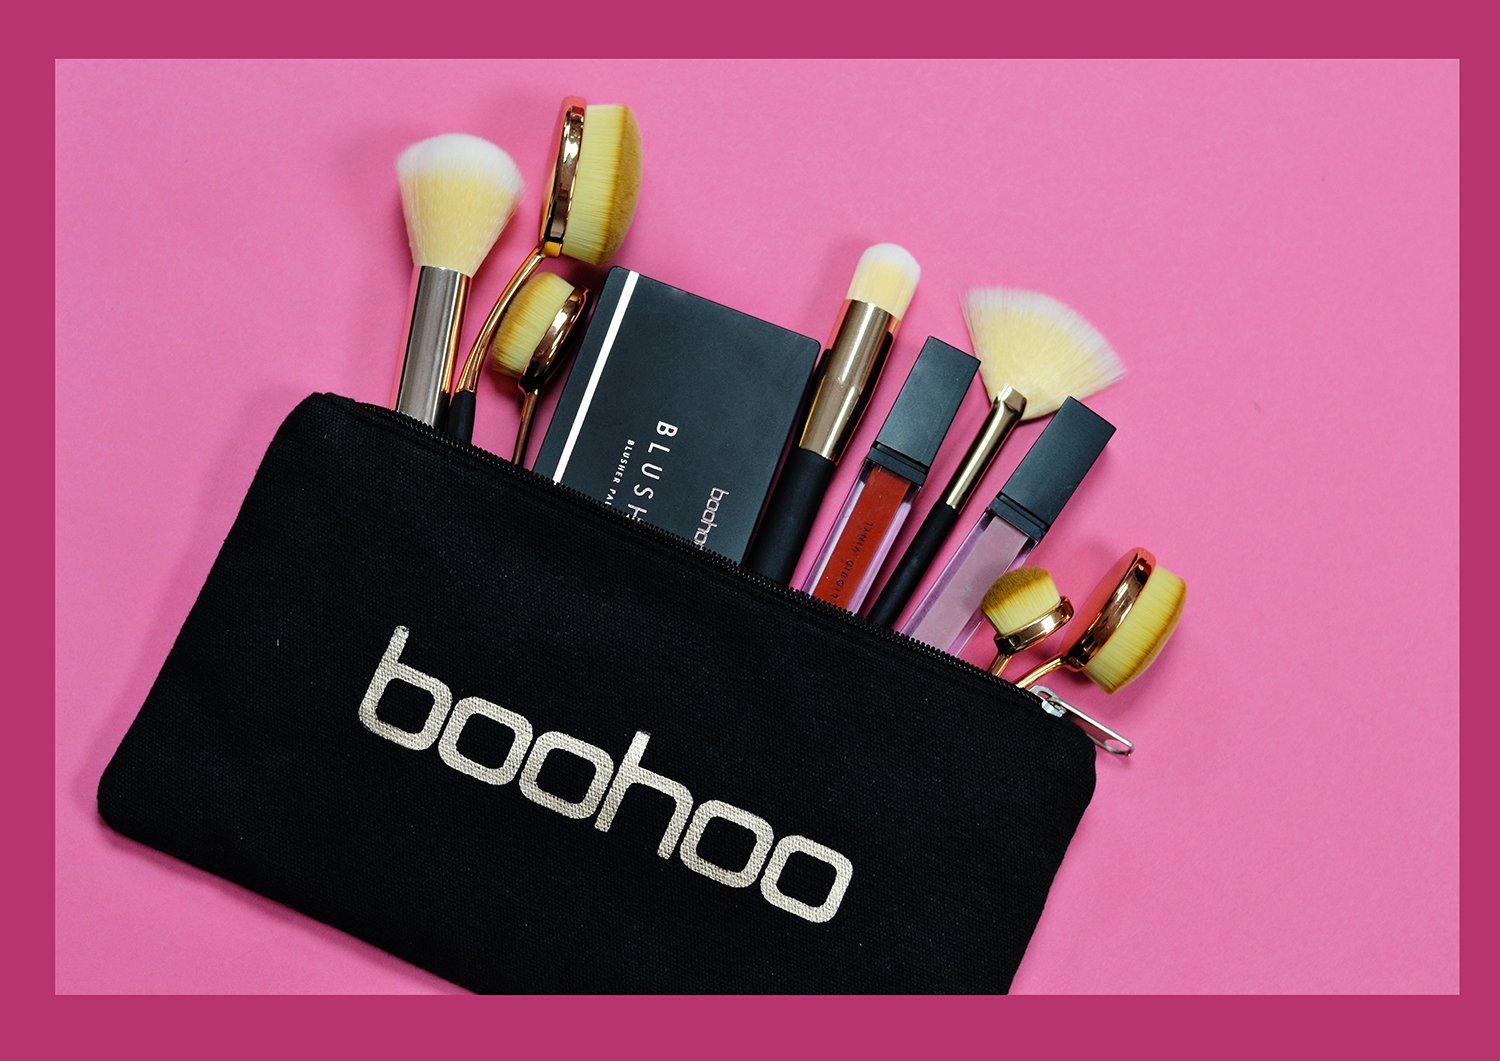 on Twitter: "Saturdays are for getting glam AF! 💄💄 Have you checked our #boohoocosmetics range? 💁 Shop it- https://t.co/GtoM984Yoo # boohoo #makeup #beauty #cosmetics #weekend https://t.co/WSdGJMUnbw" / Twitter